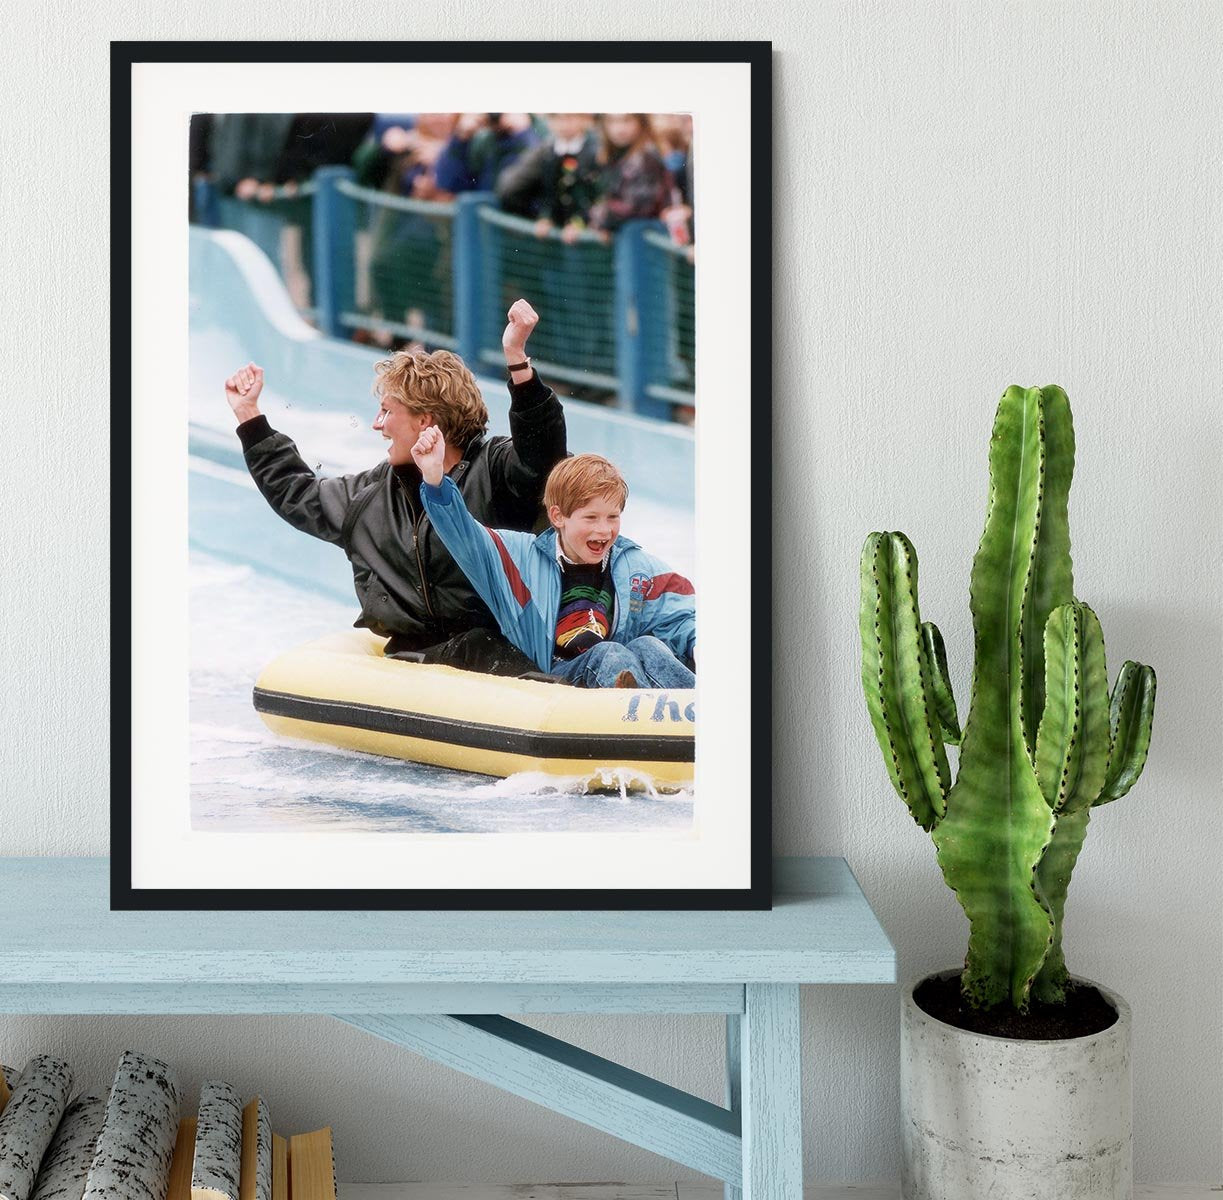 Princess Diana with Prince Harry on a water ride Framed Print - Canvas Art Rocks - 1